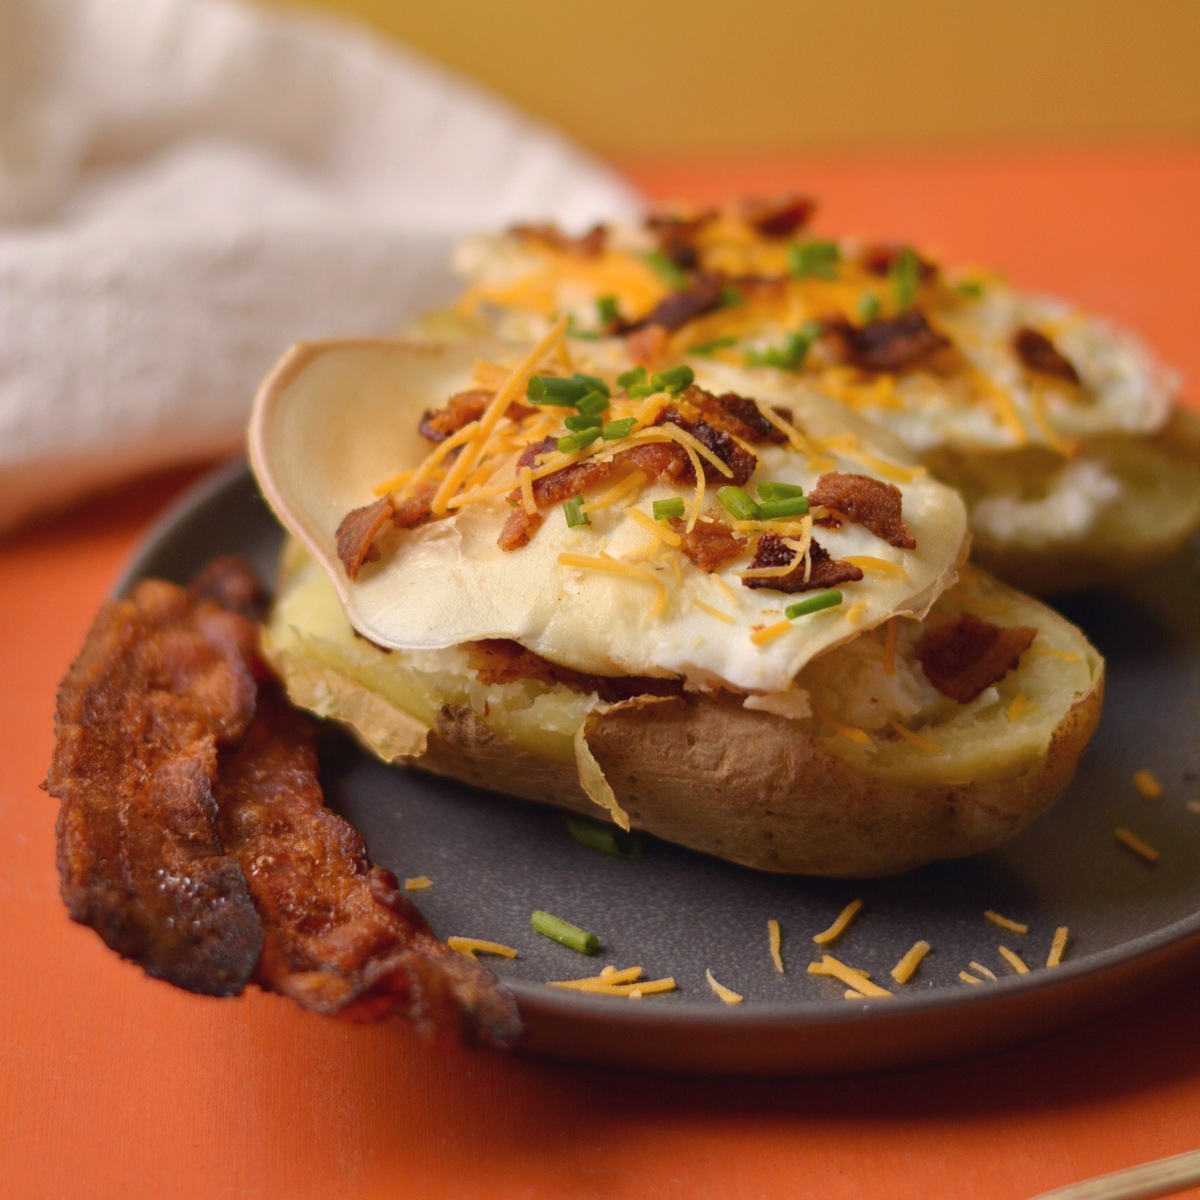 Russet baked breakfast potato with an egg and bacon on top.